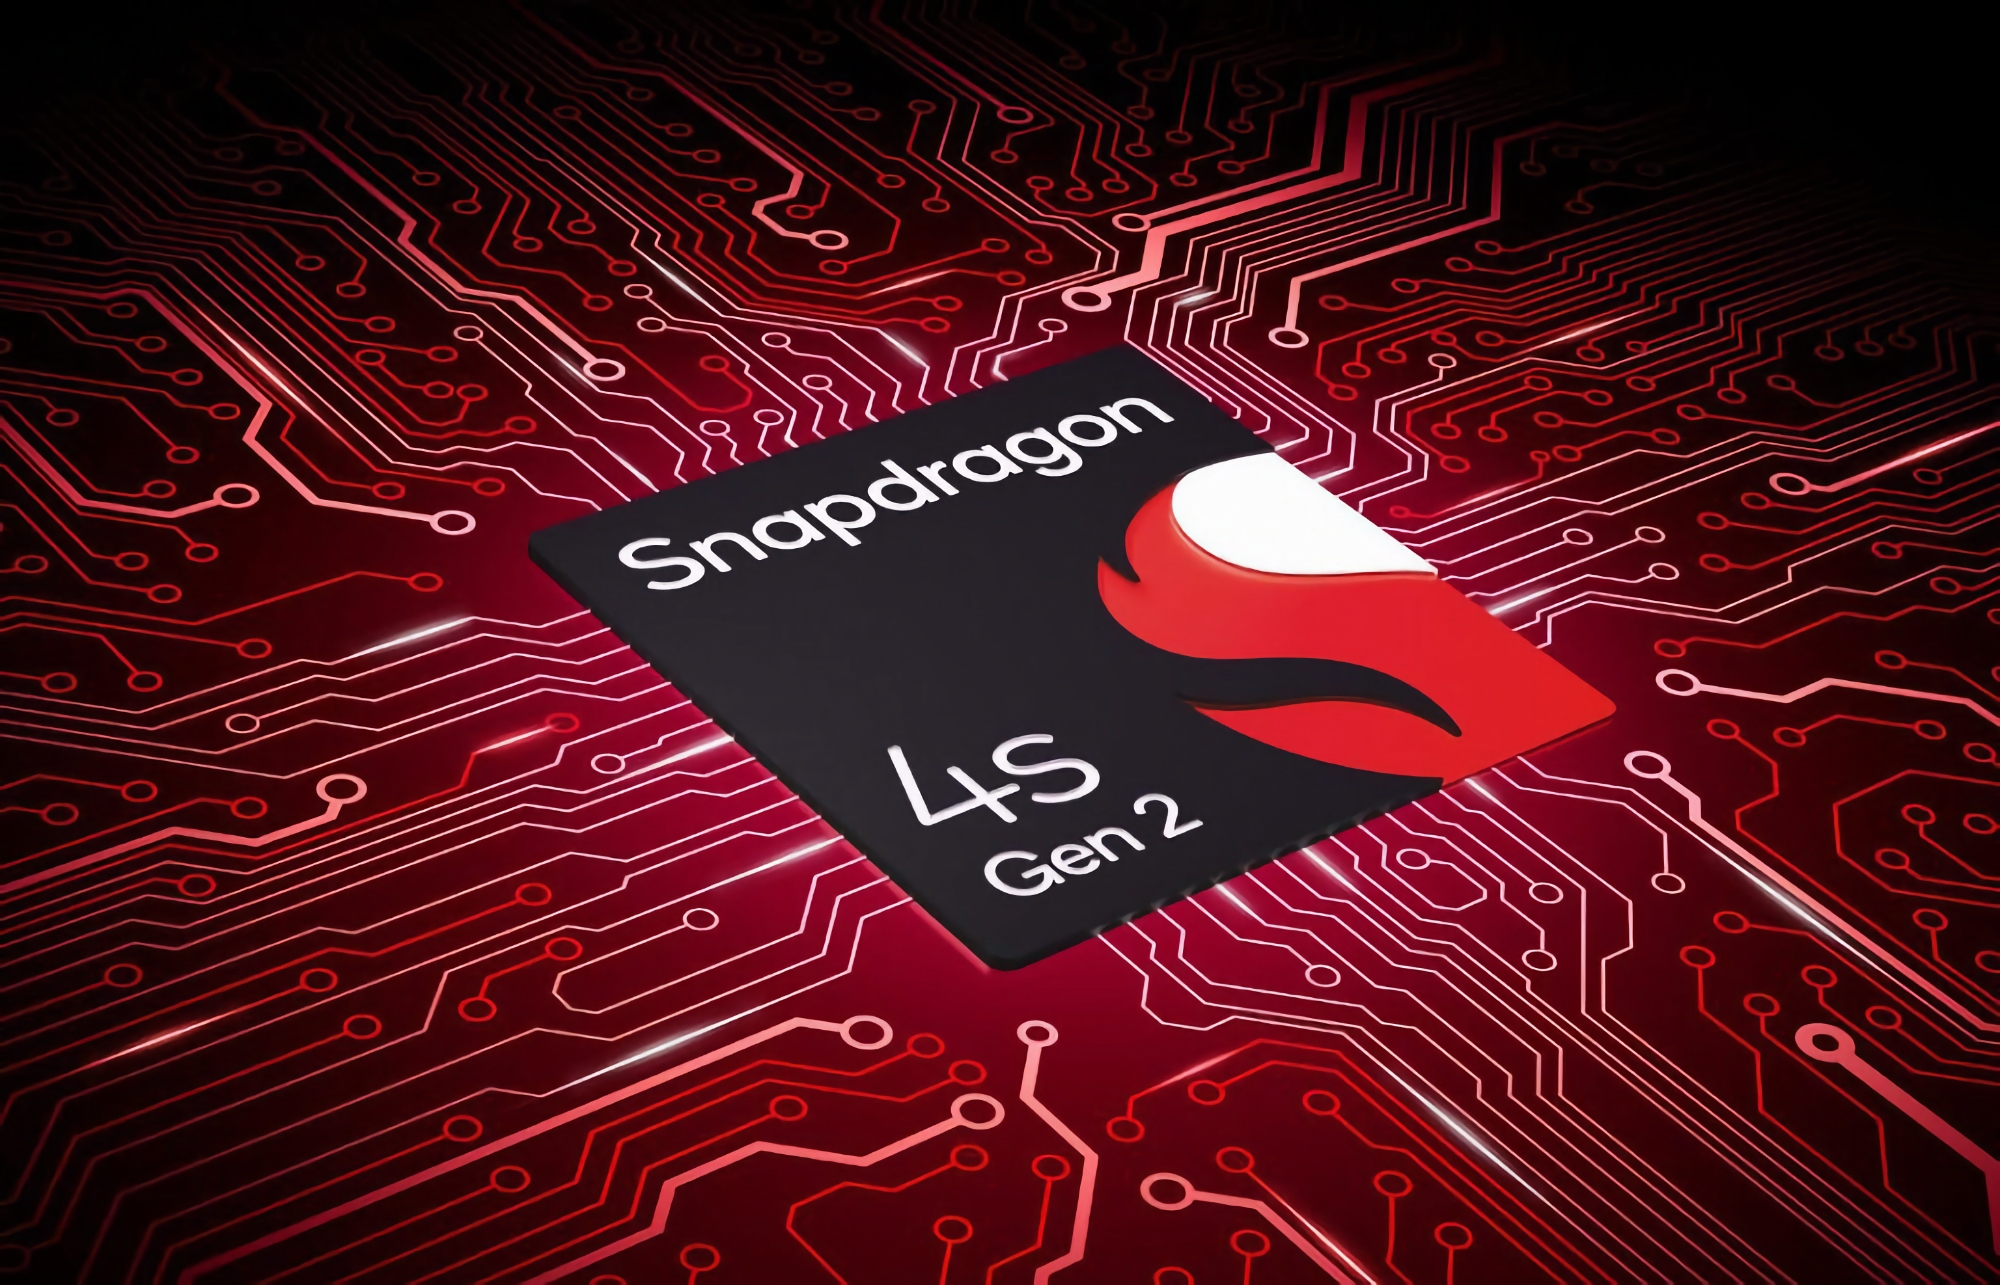 Qualcomm unveiled Snapdragon 4s Gen 2: a new 5G processor for budget smartphones